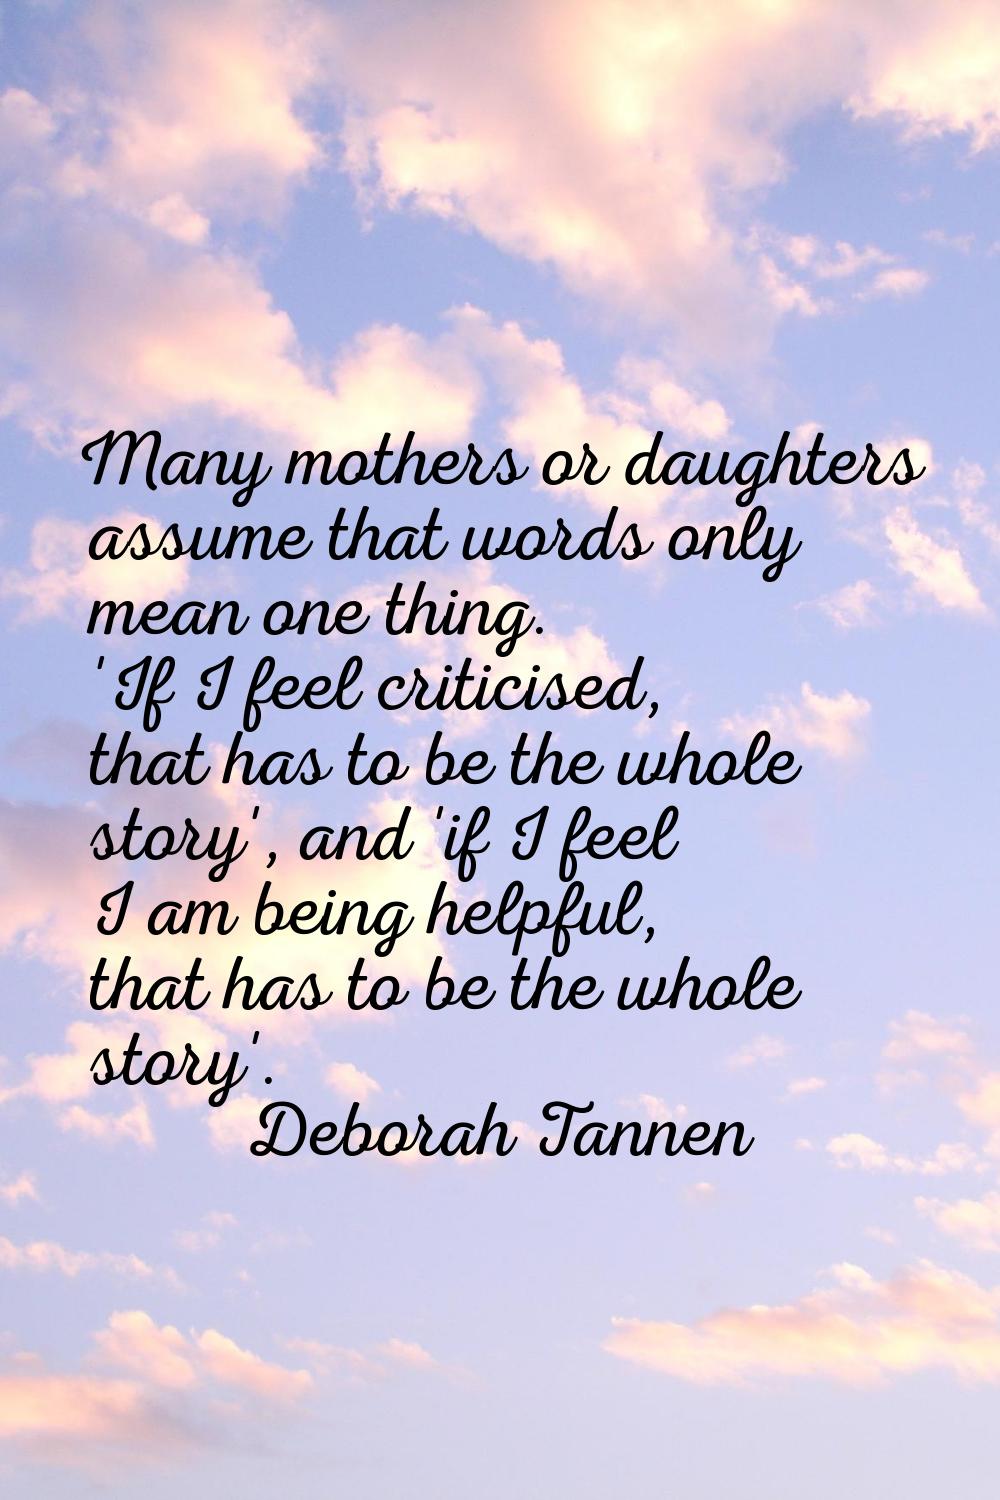 Many mothers or daughters assume that words only mean one thing. 'If I feel criticised, that has to